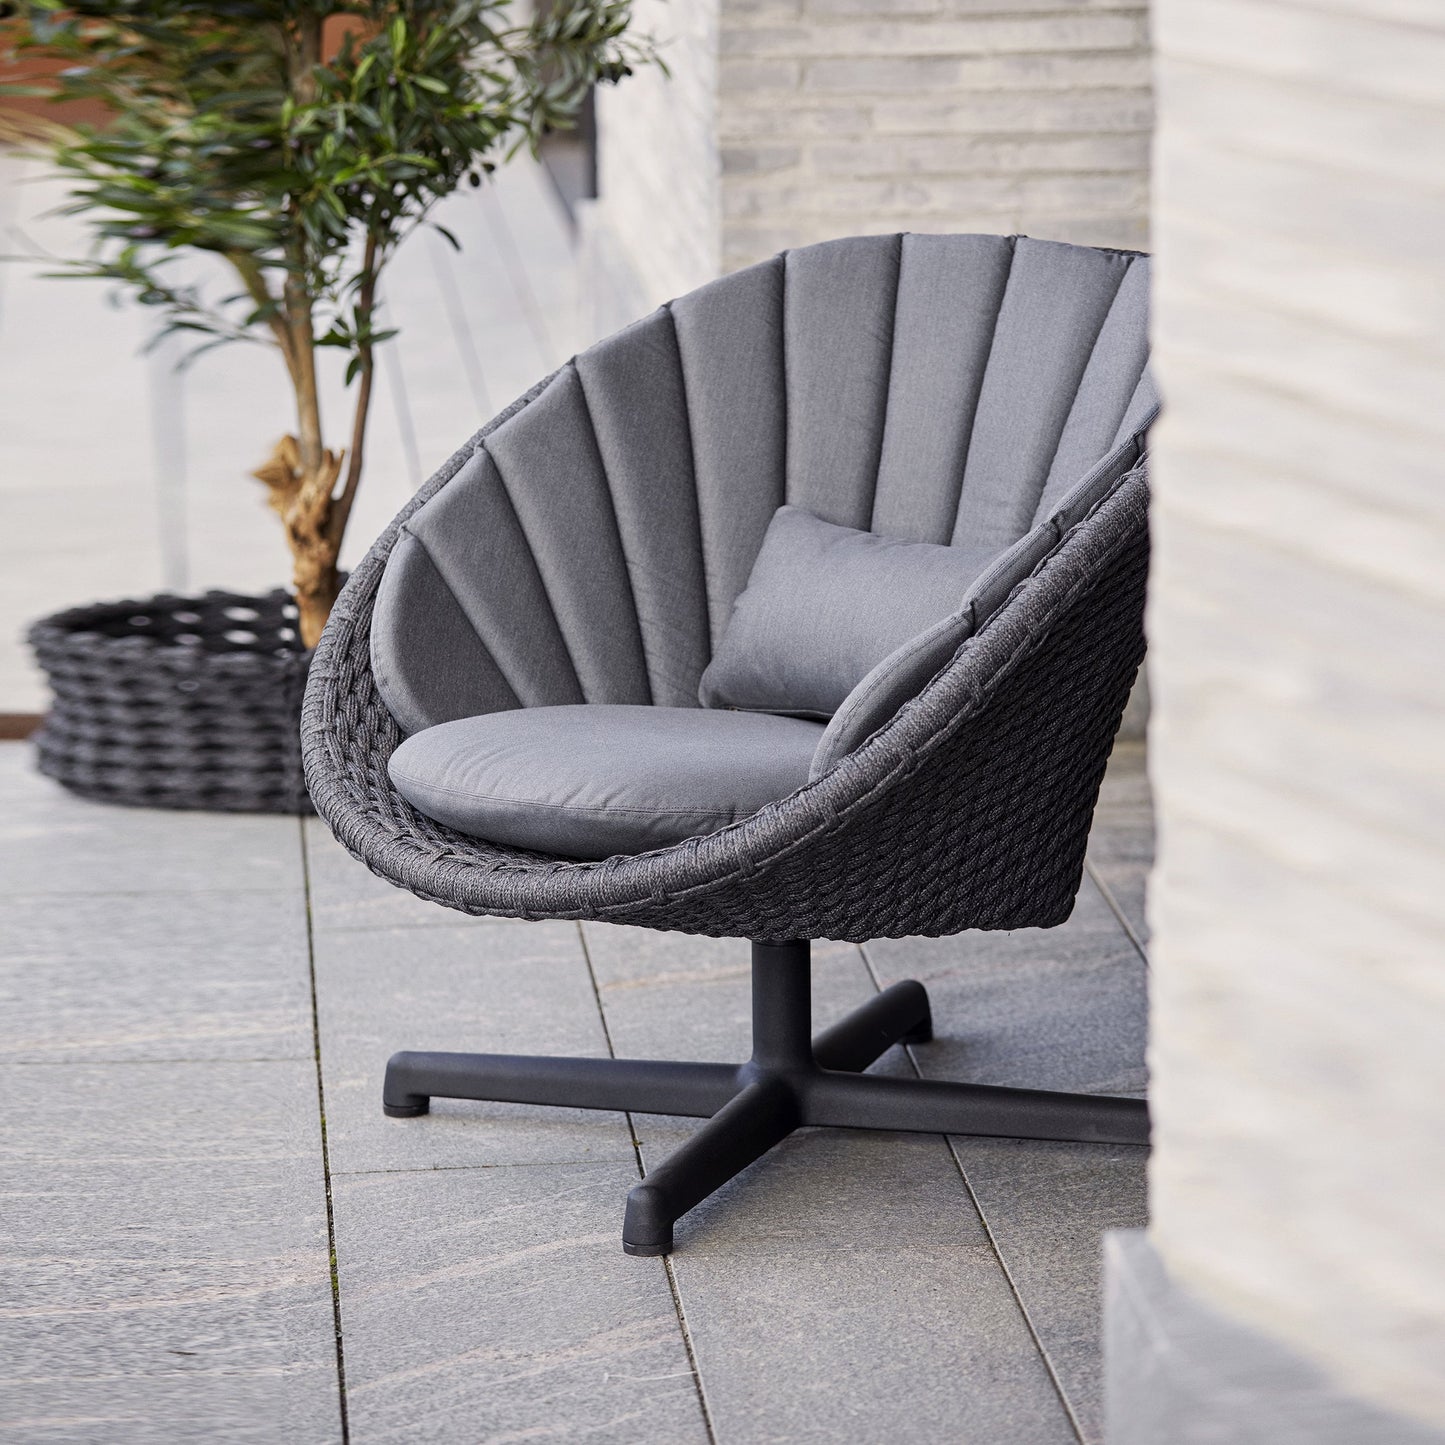 Peacock Lounge Chair with Swivel Base